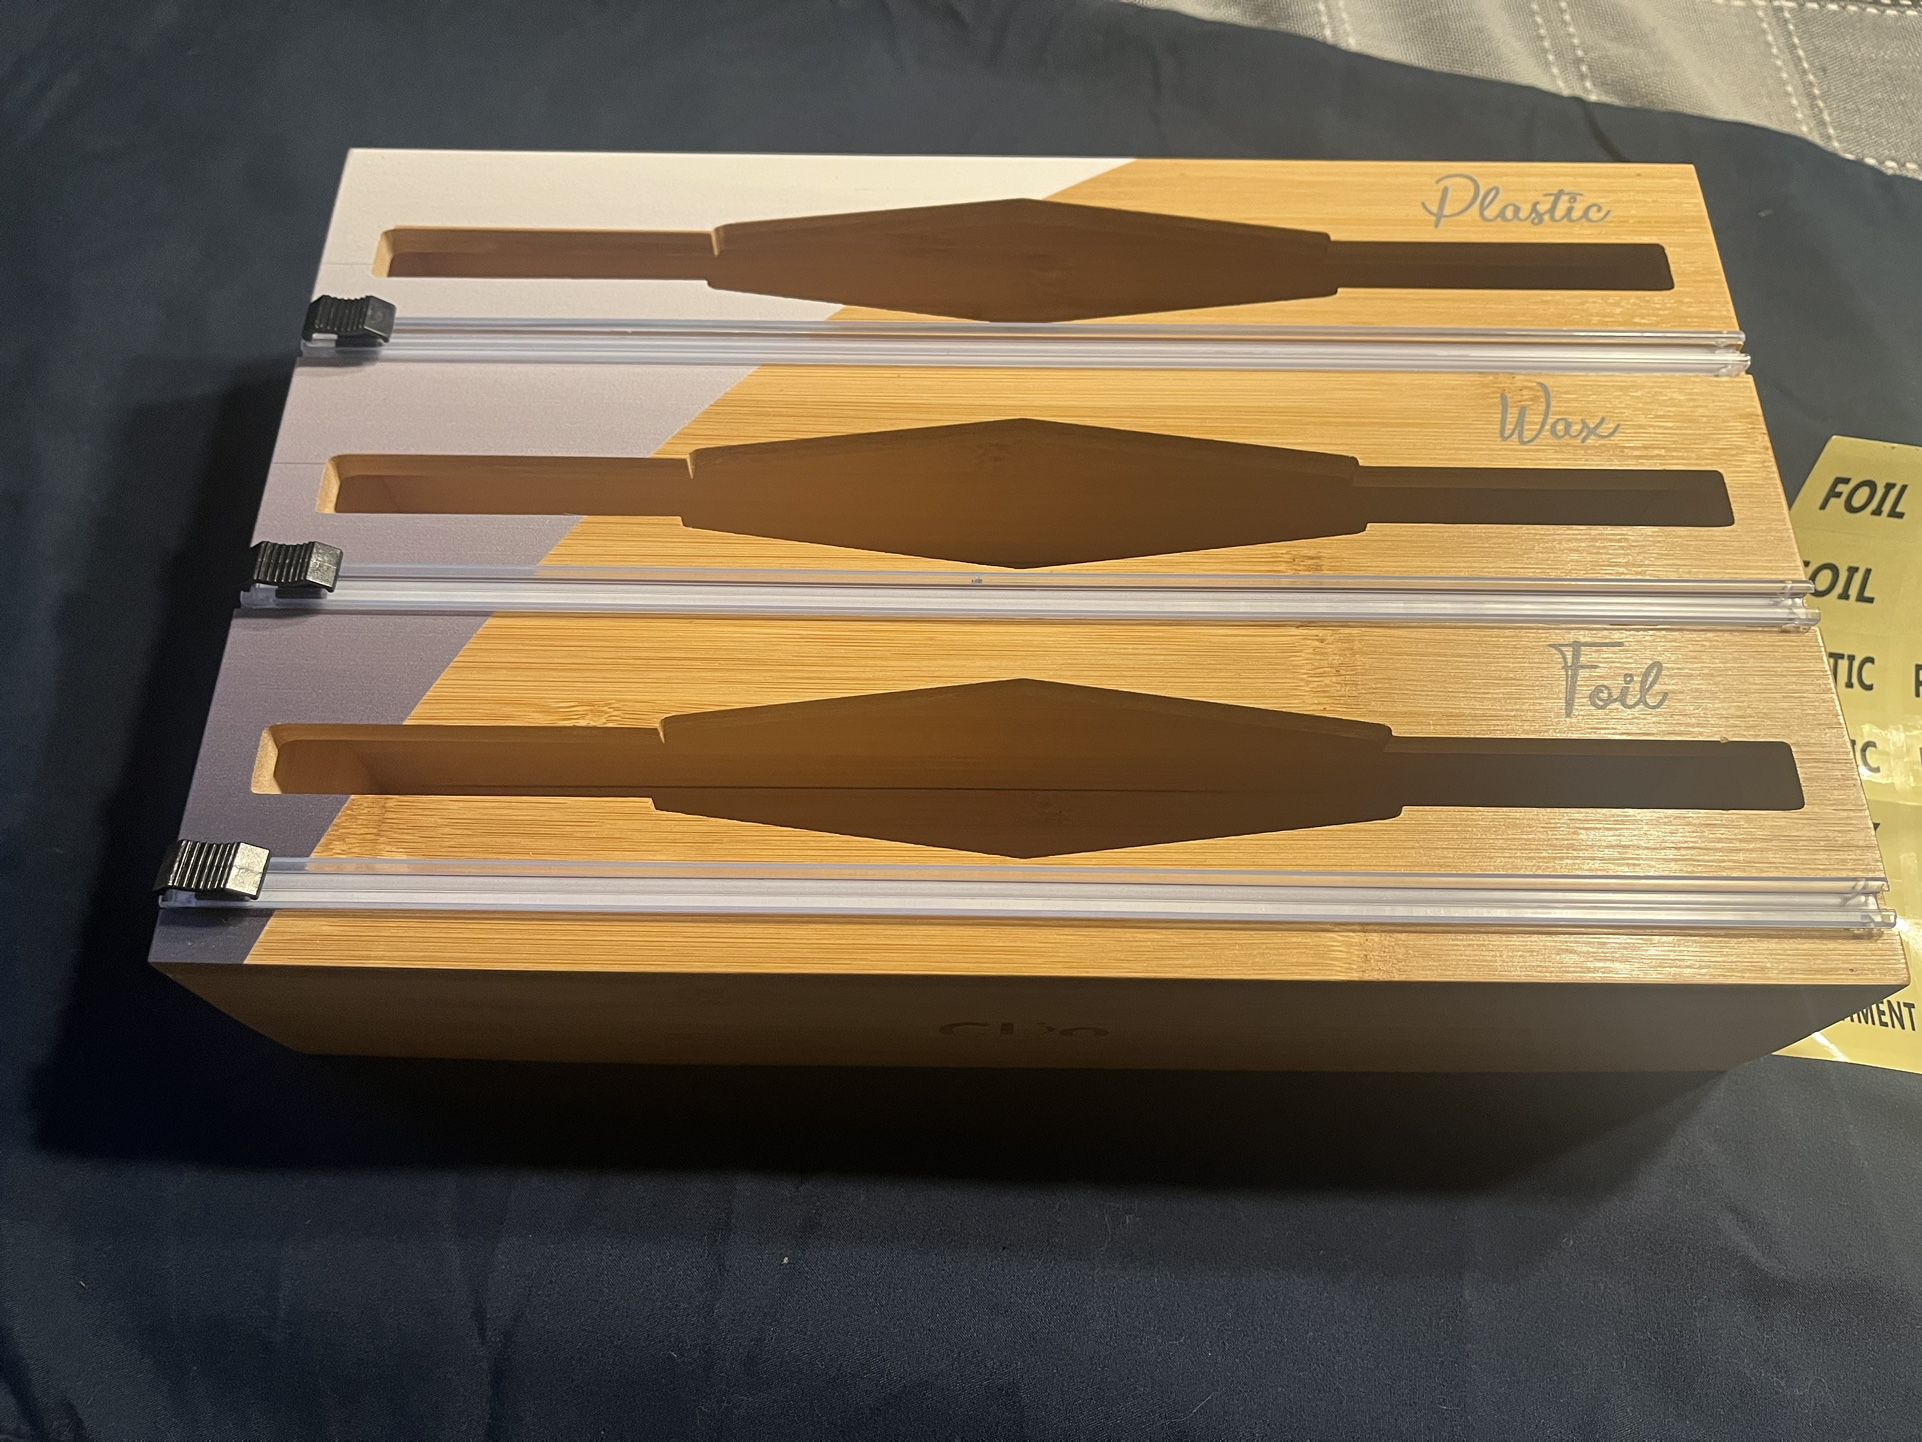 Bamboo Foil, Wax, And Plastic Organizer With Cutter. Brand New! Check Out All Pics!